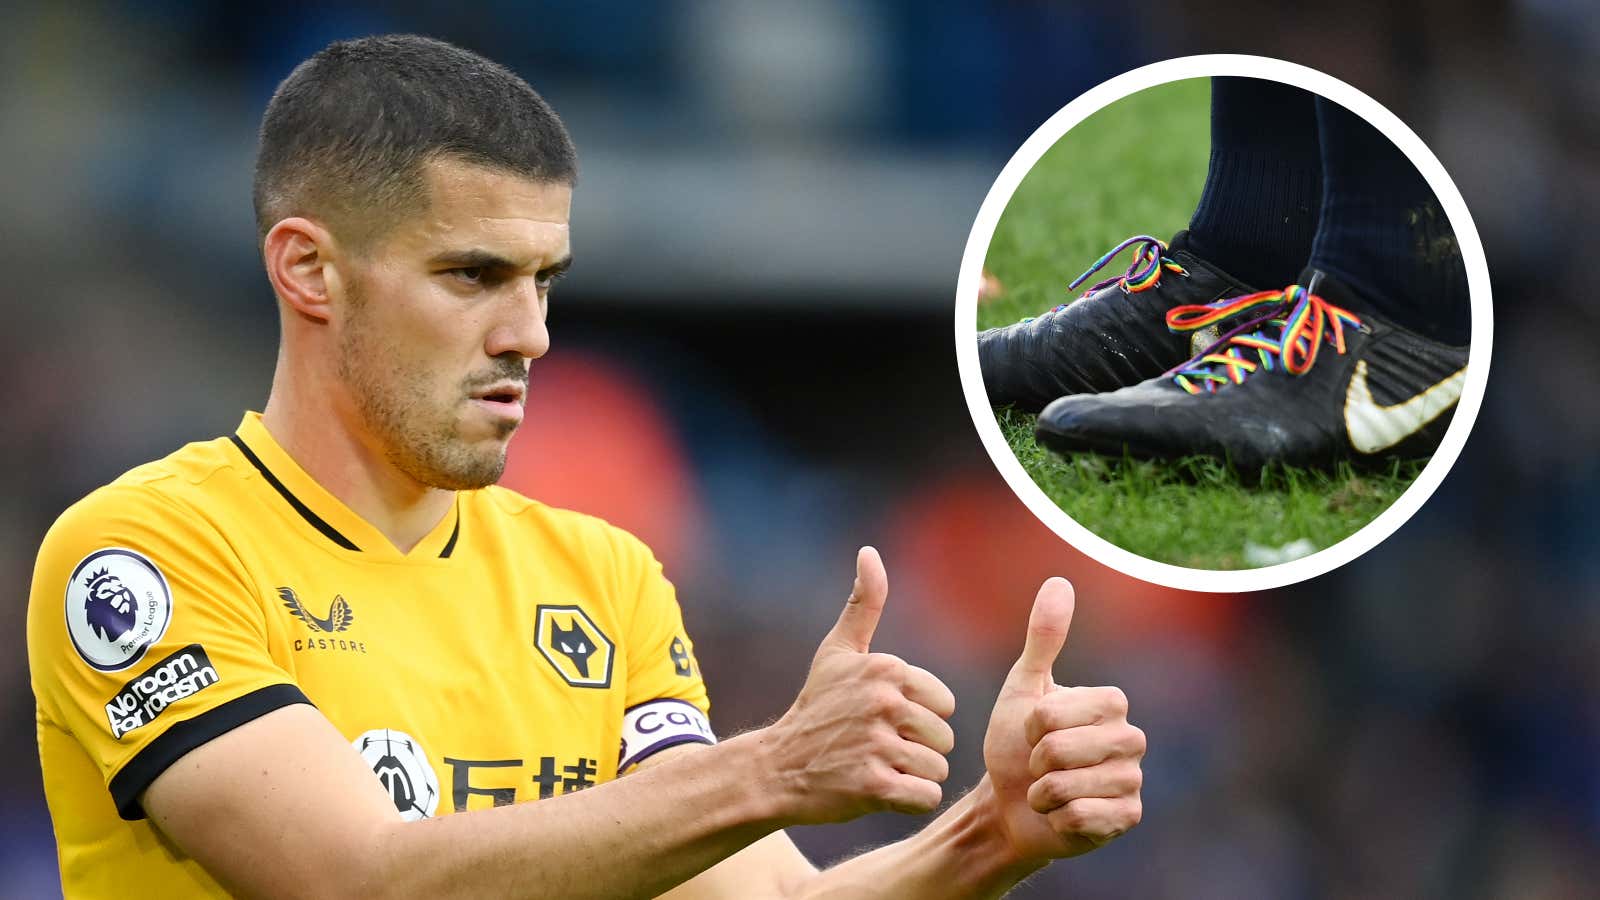 'Being gay will be part of everyday life in football' – England star Coady on his firm stance as an outspoken LGBT ally